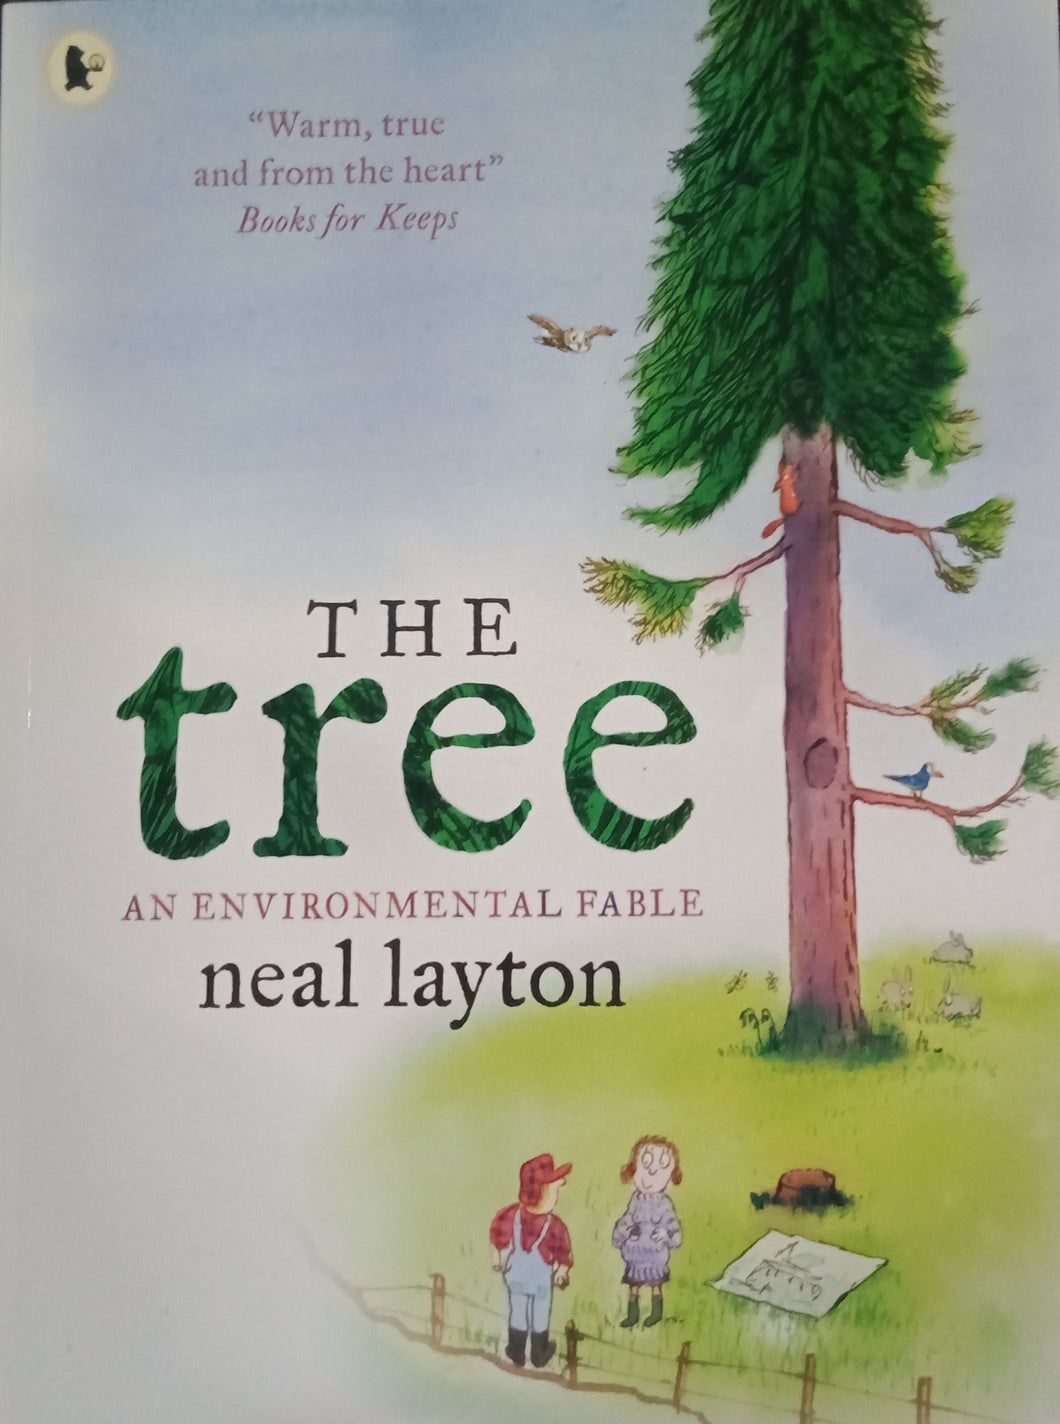 The tree by Neal Layton